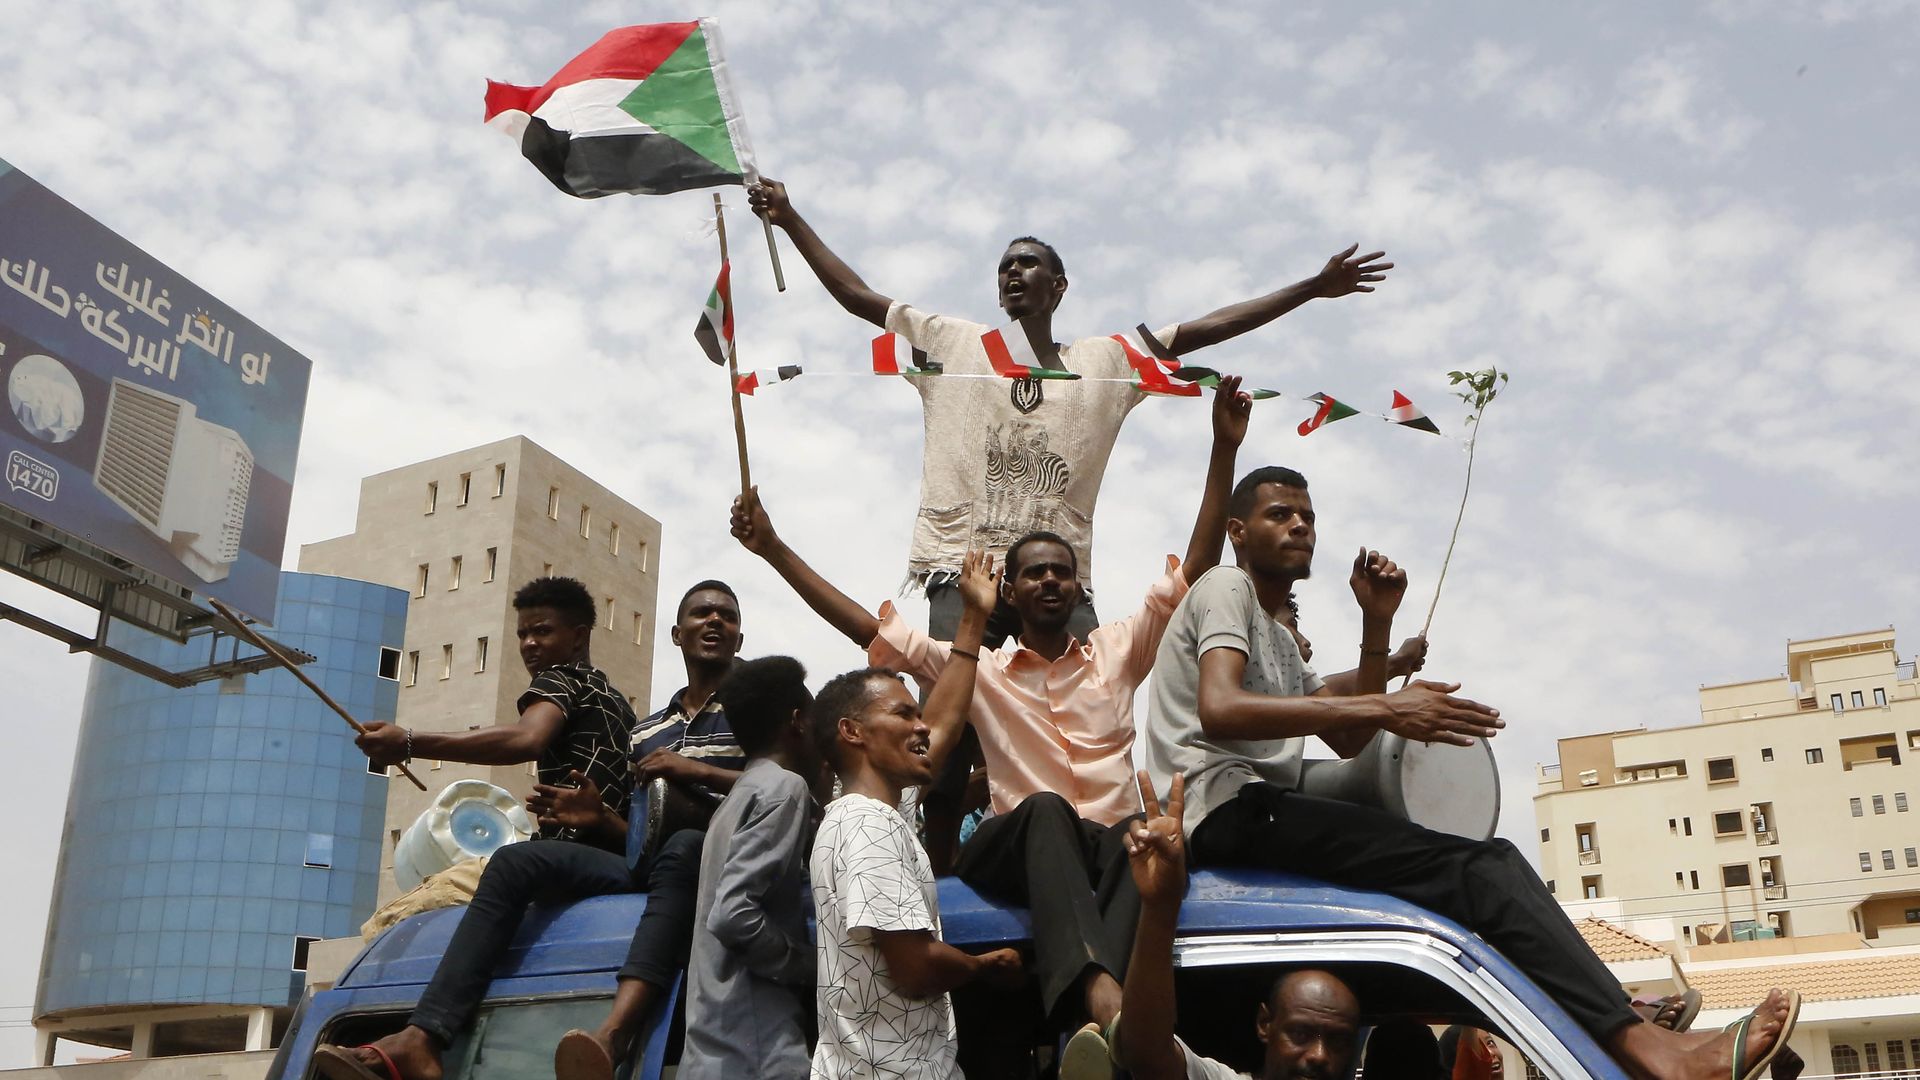 Sudanese people celebrate after civilian and military leaders reached an agreement